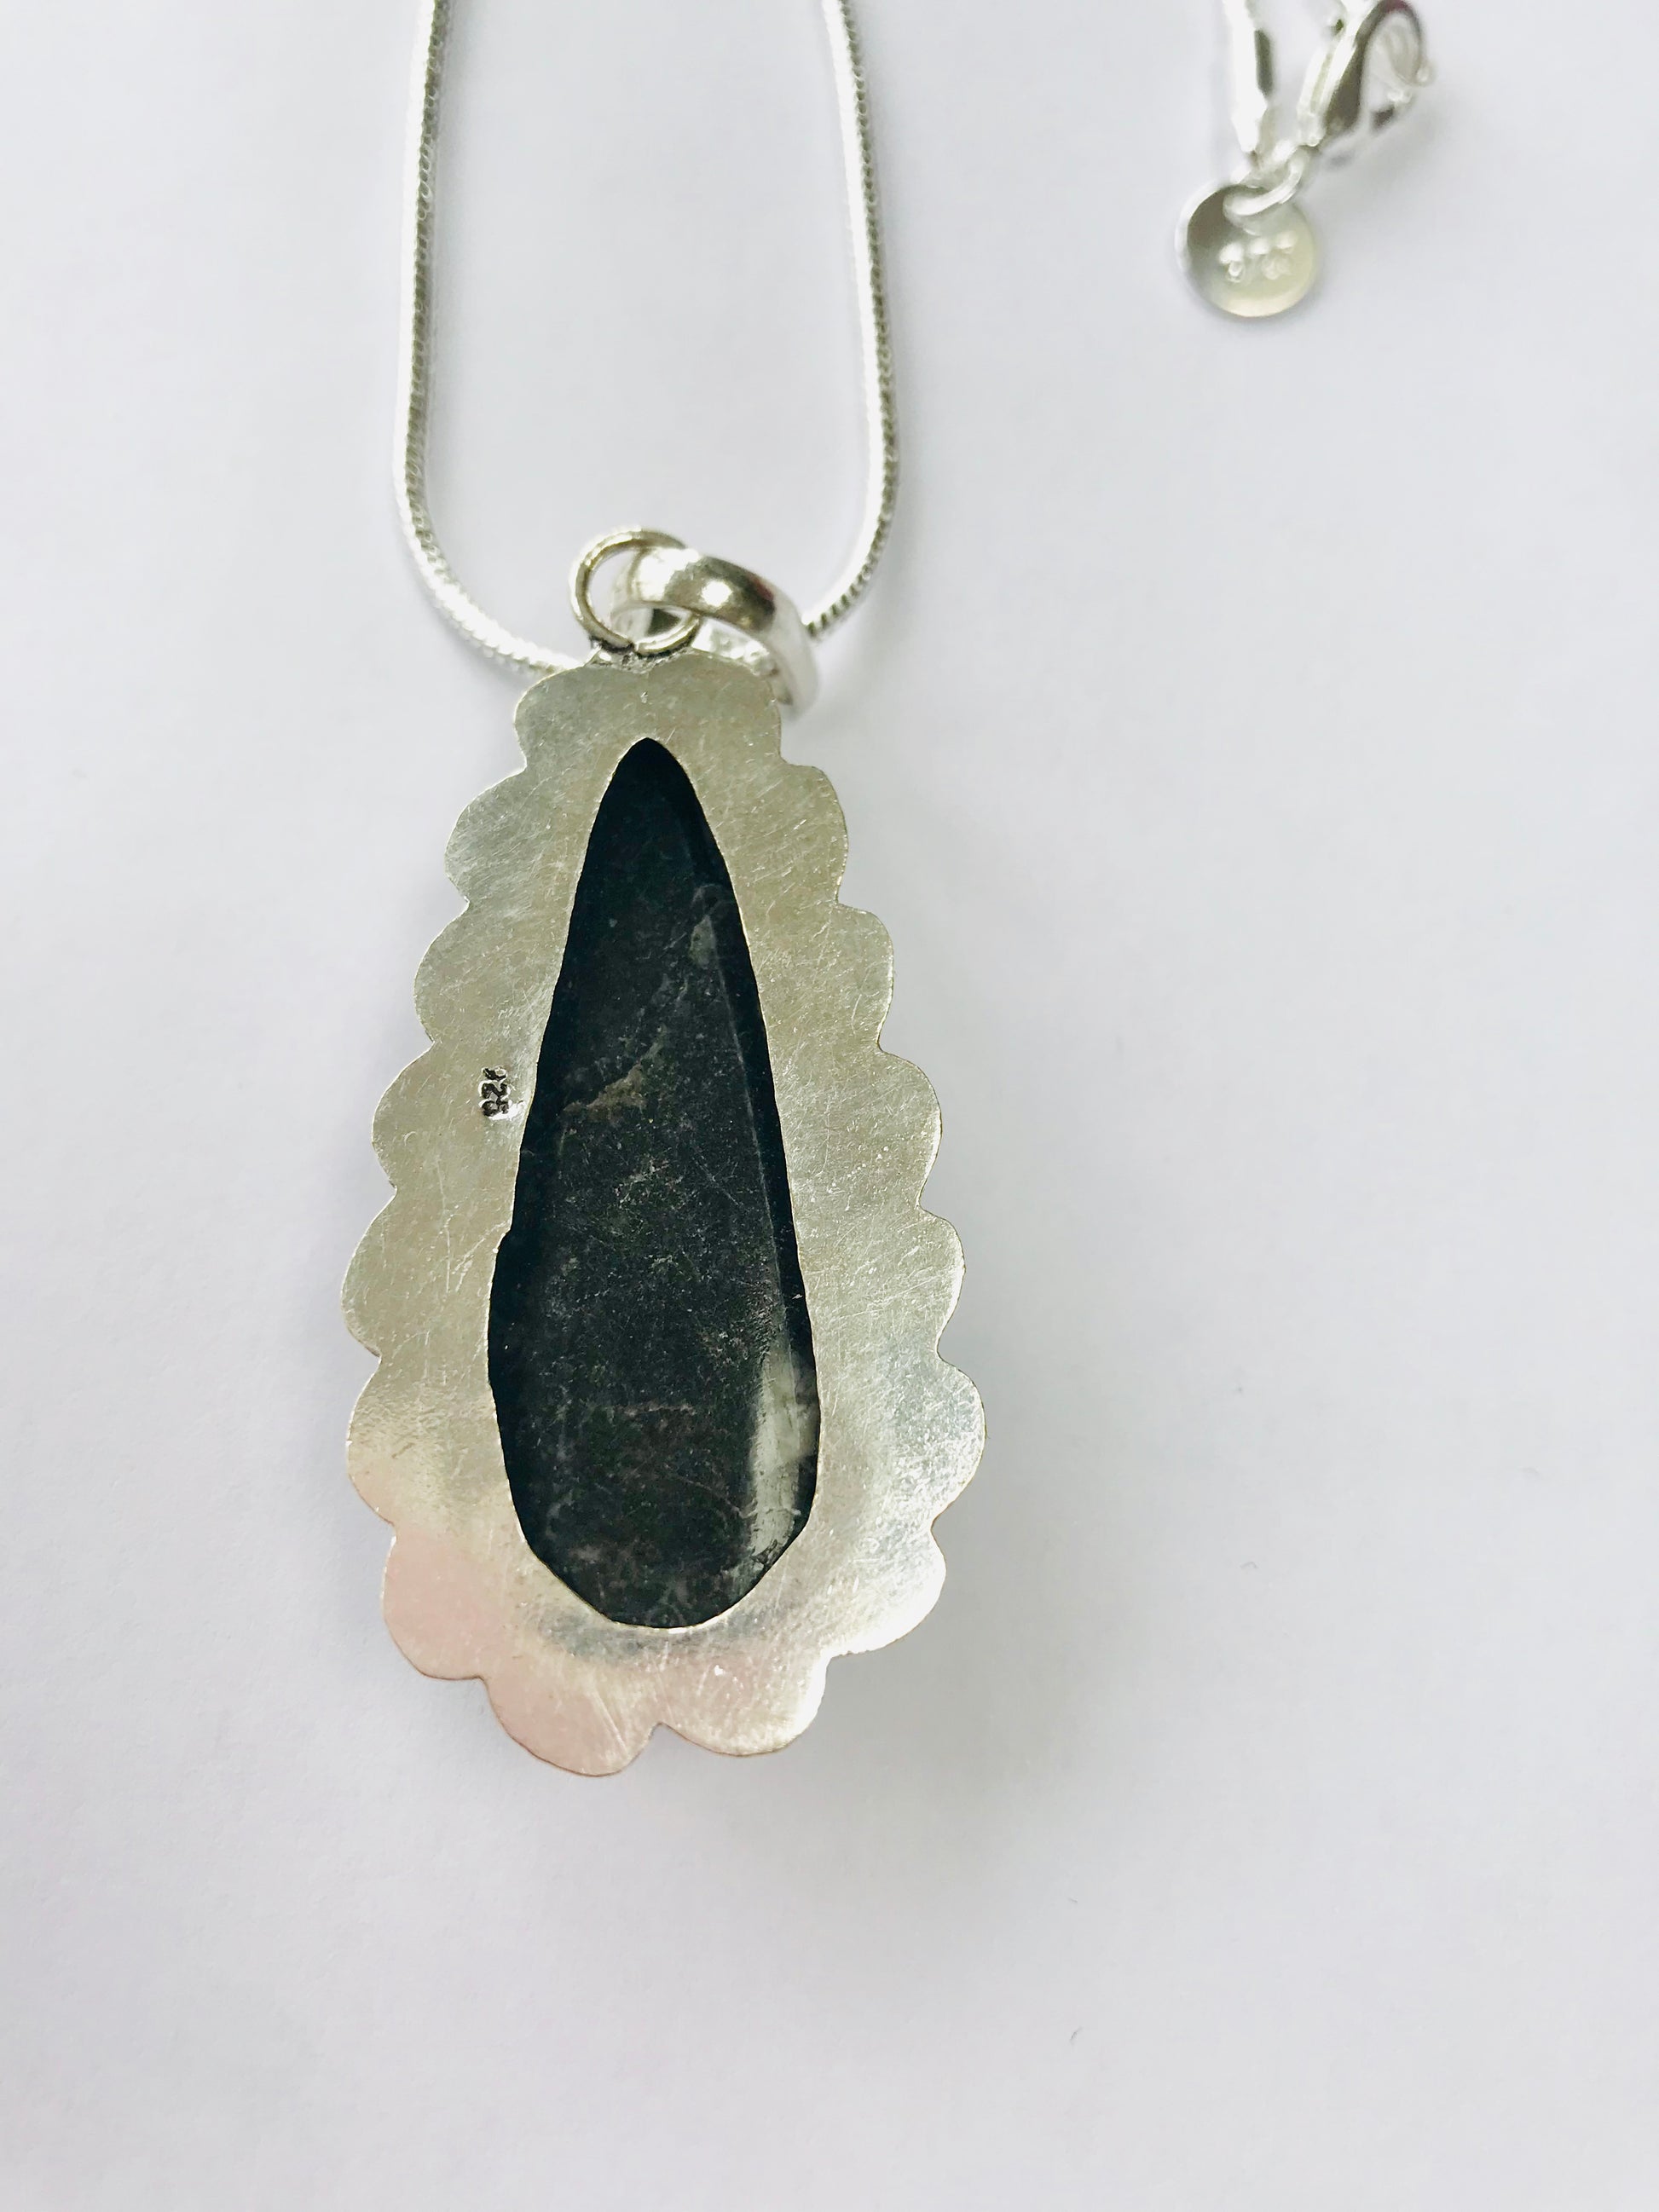 Orthoceras Fossil Pendant & 925 Silver Snake Chain - Reduces Toxins - Crystal Boutique.co.uk 